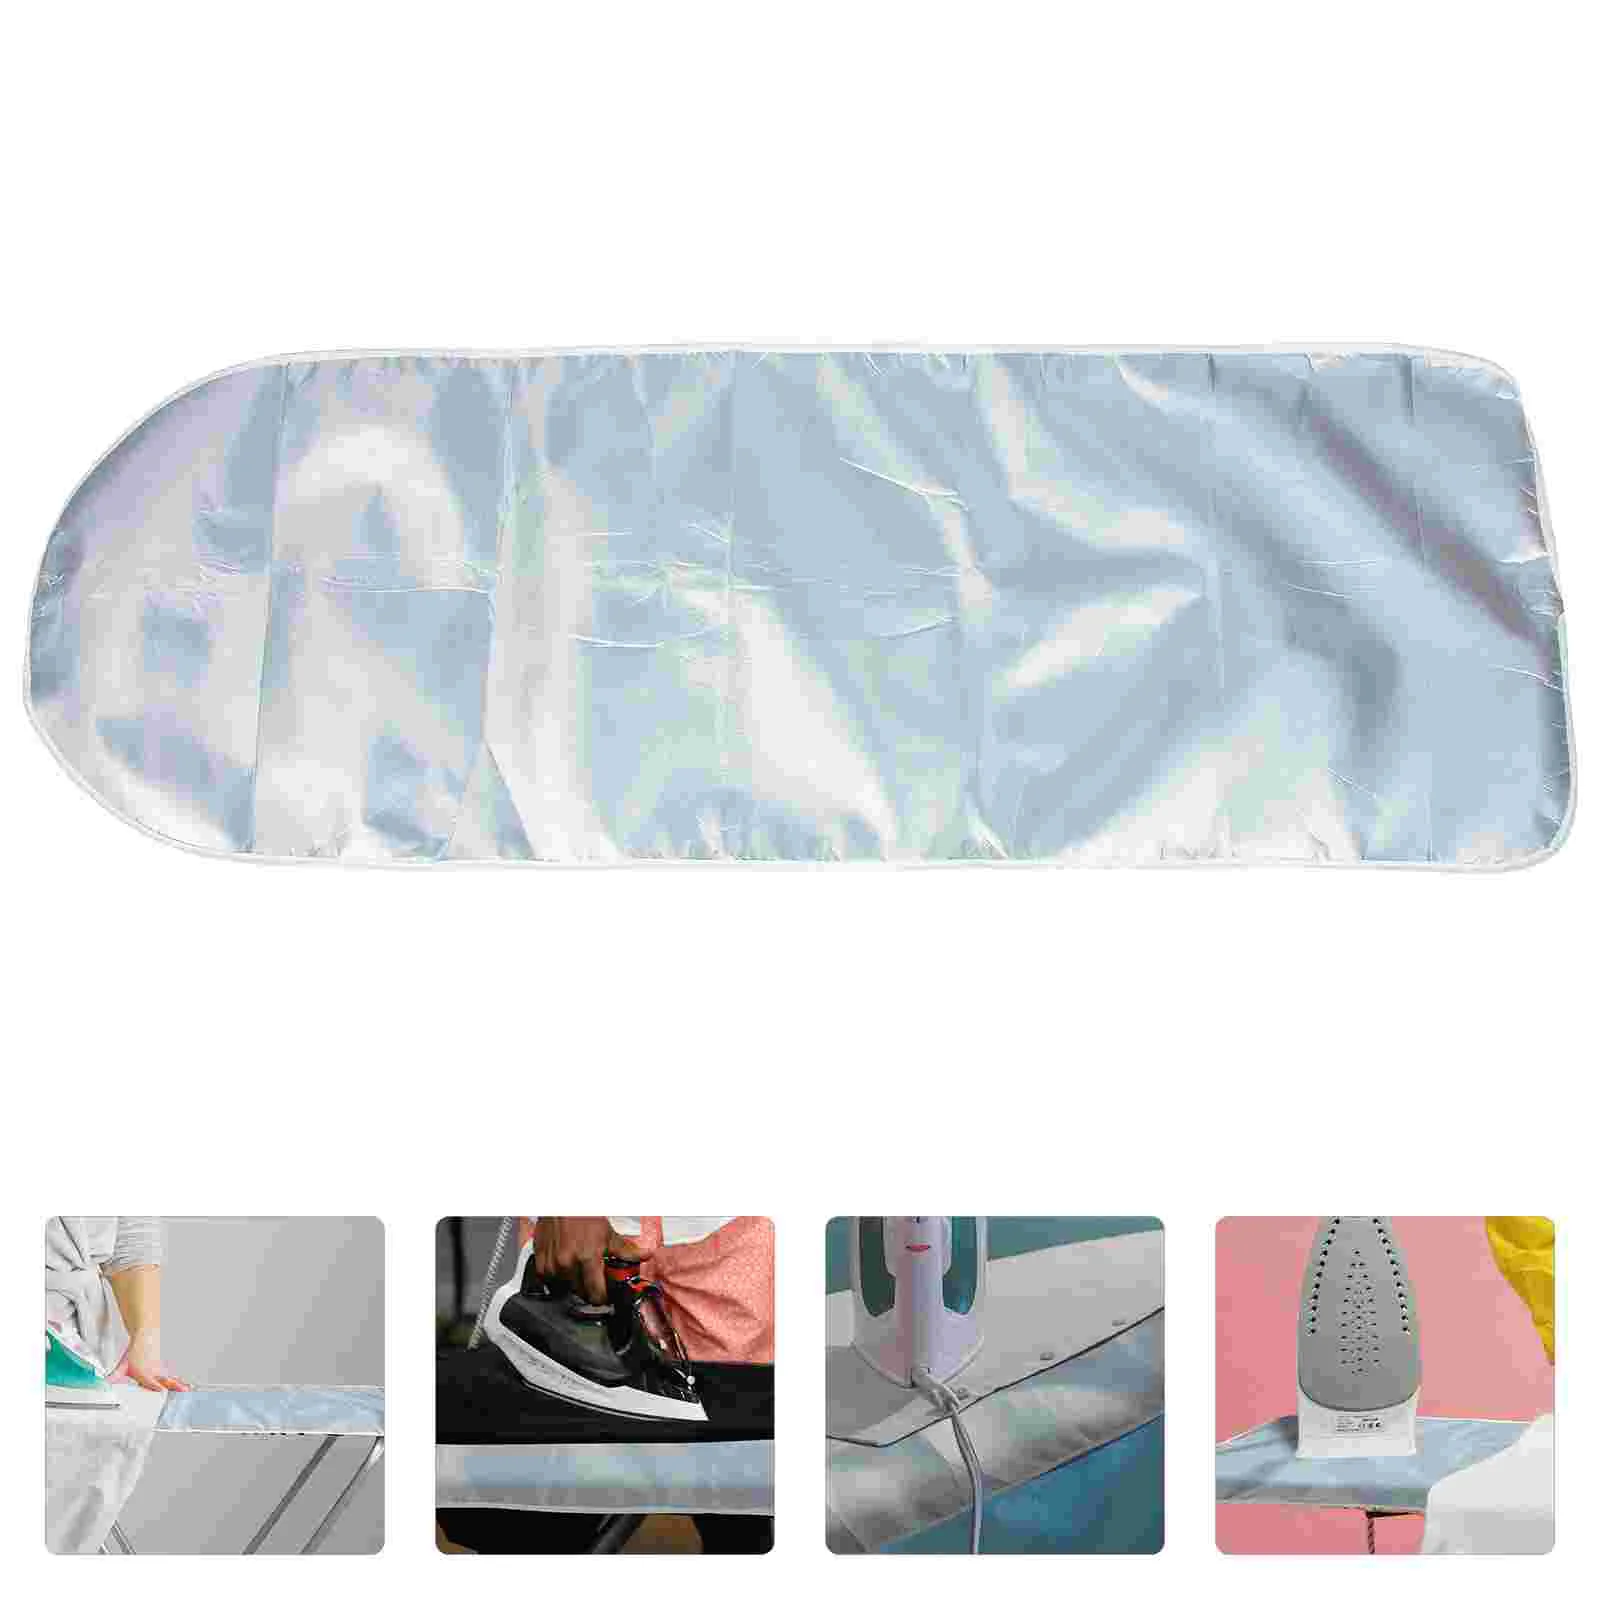 

Ironing Board Cover Fashion Pad Protection Tabletop Practical Cloth Polyester Stain Resistant